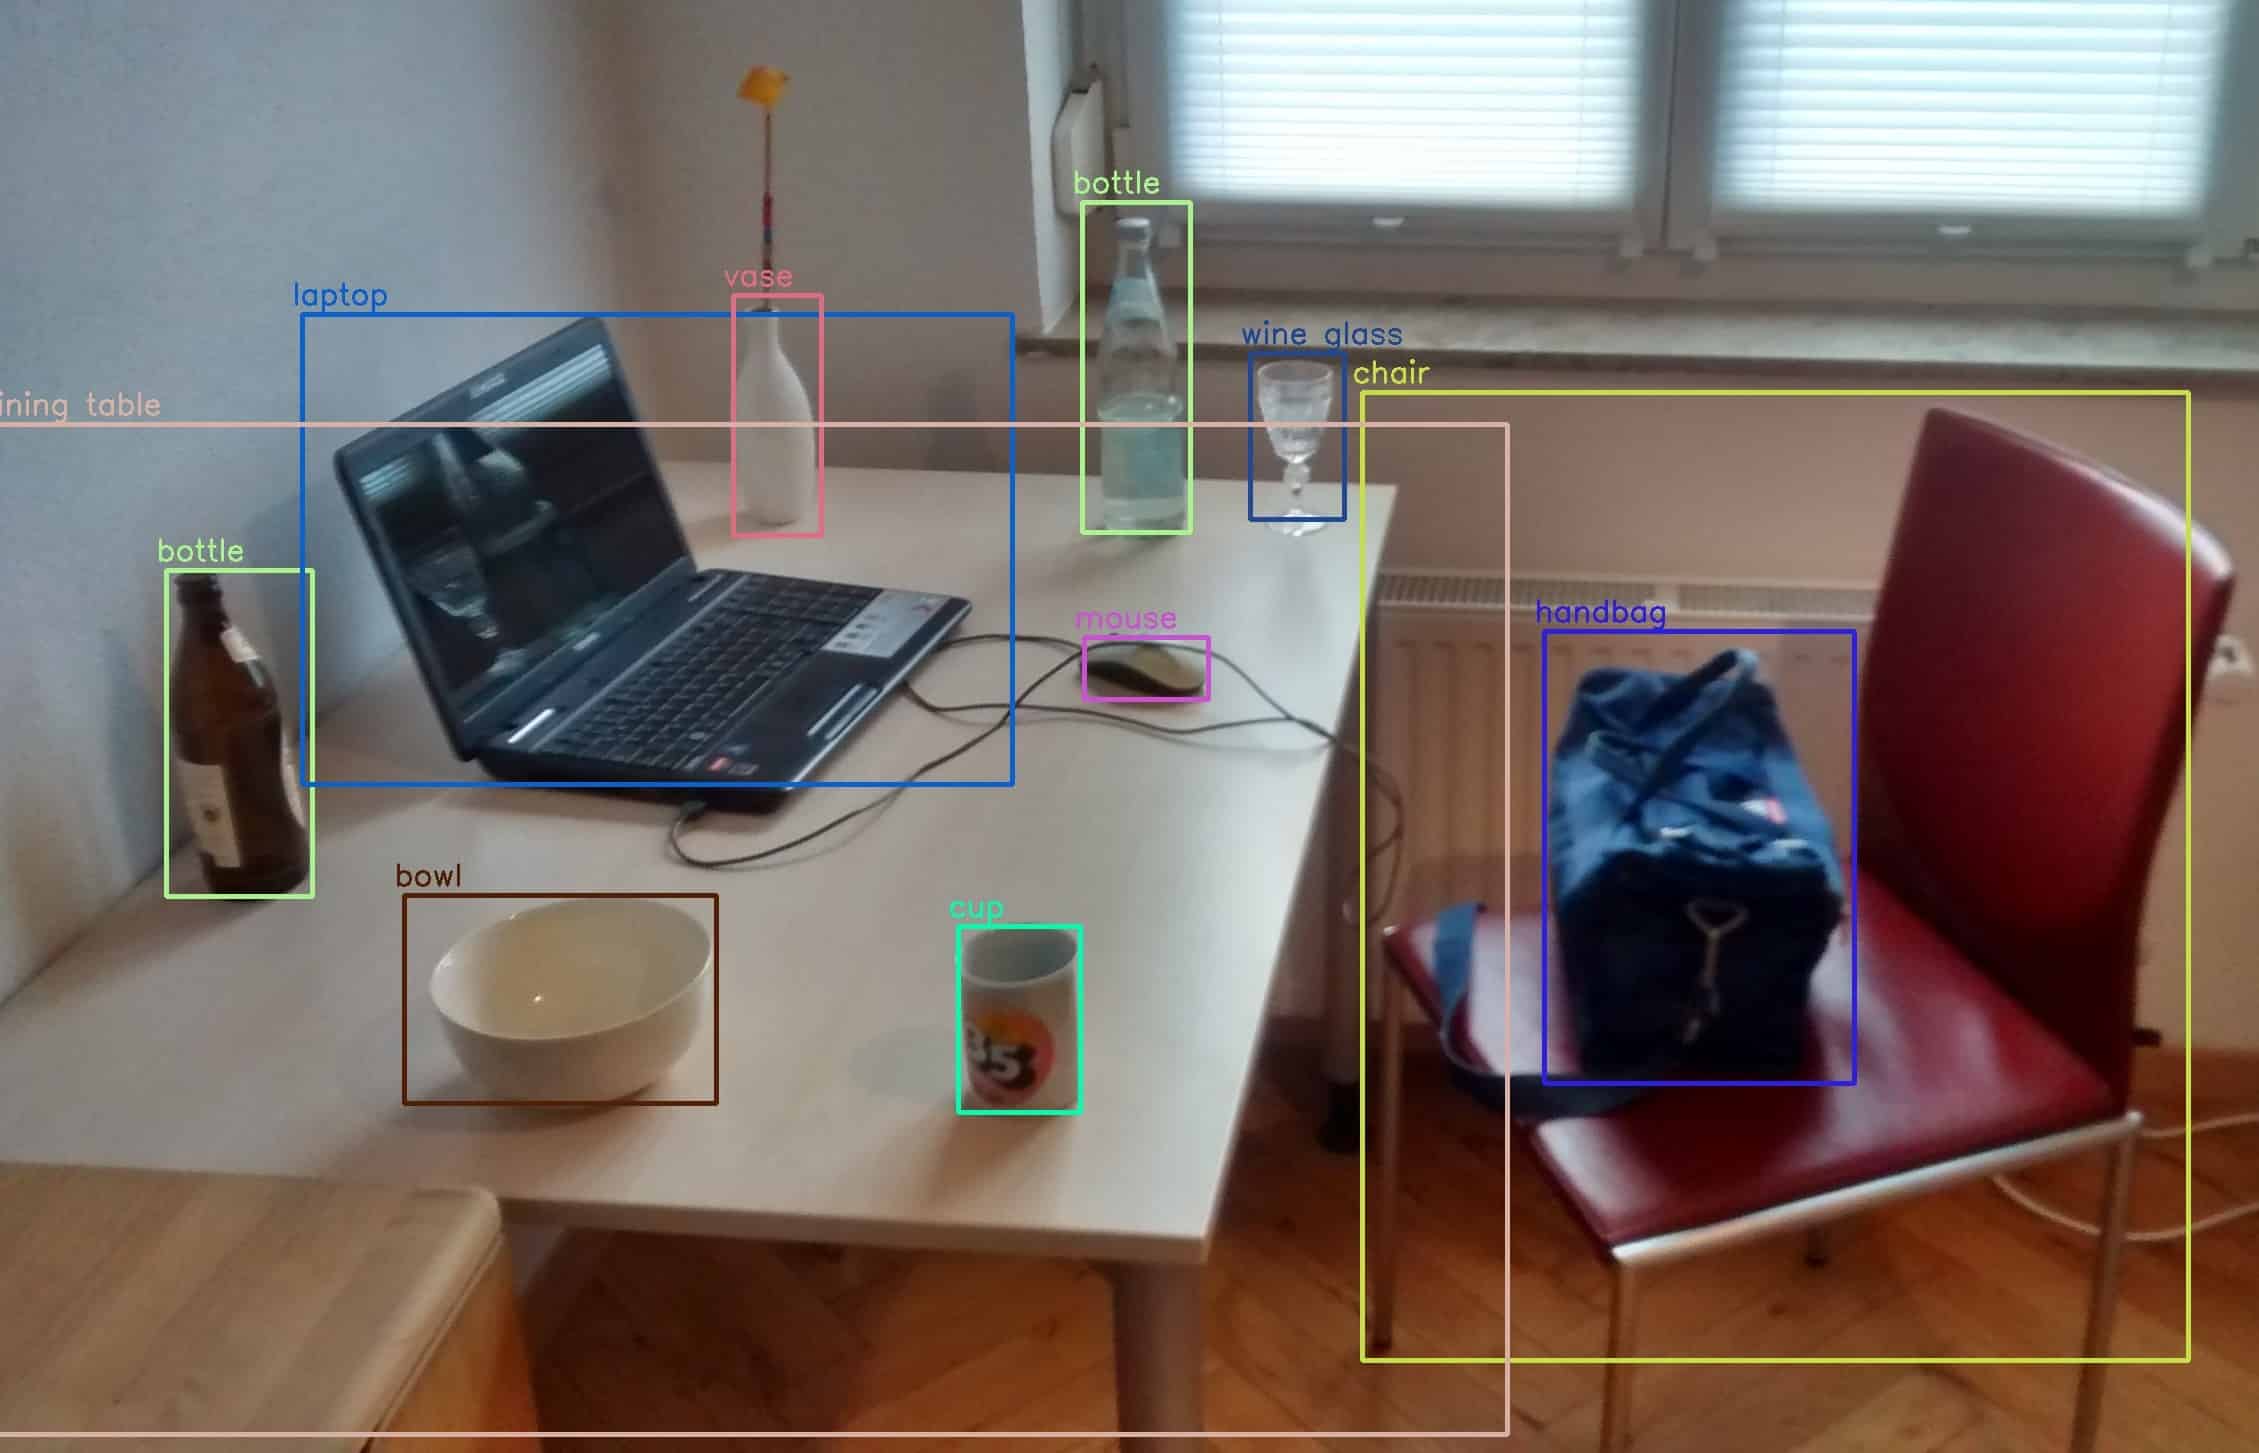 Object detection example